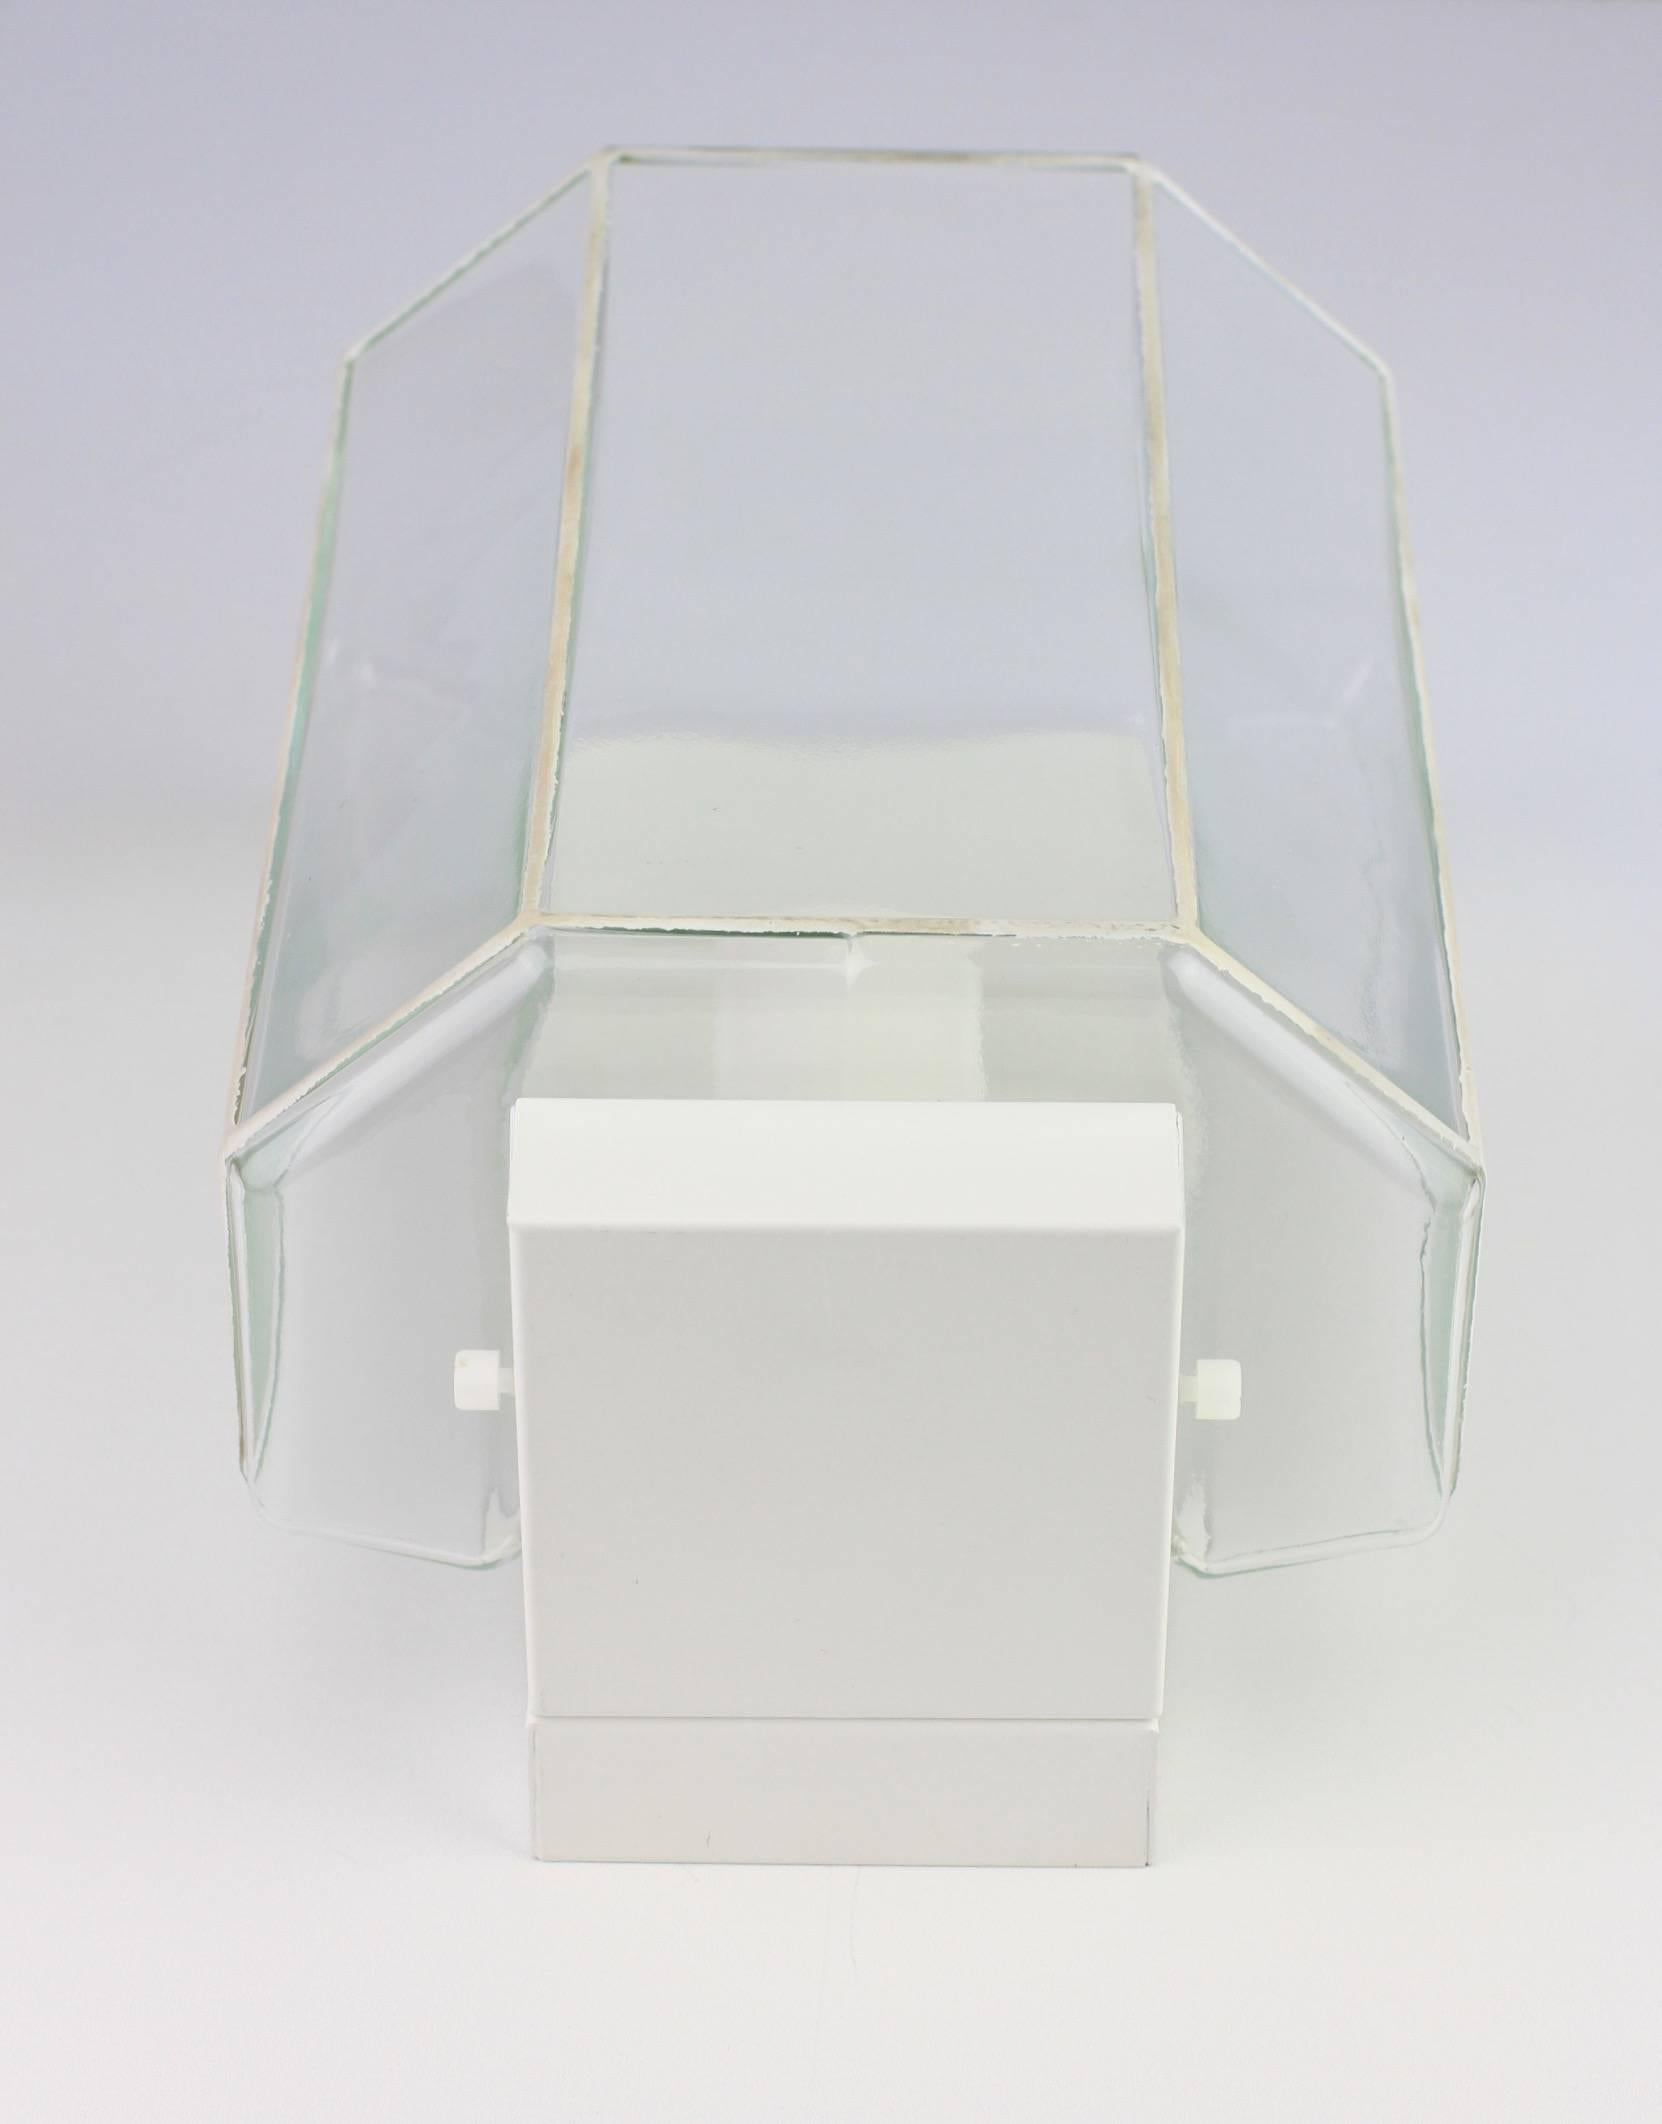 Molded 1 of 3 1970s Minimalist White and Clear Glass Wall Lights by Glashütte Limburg